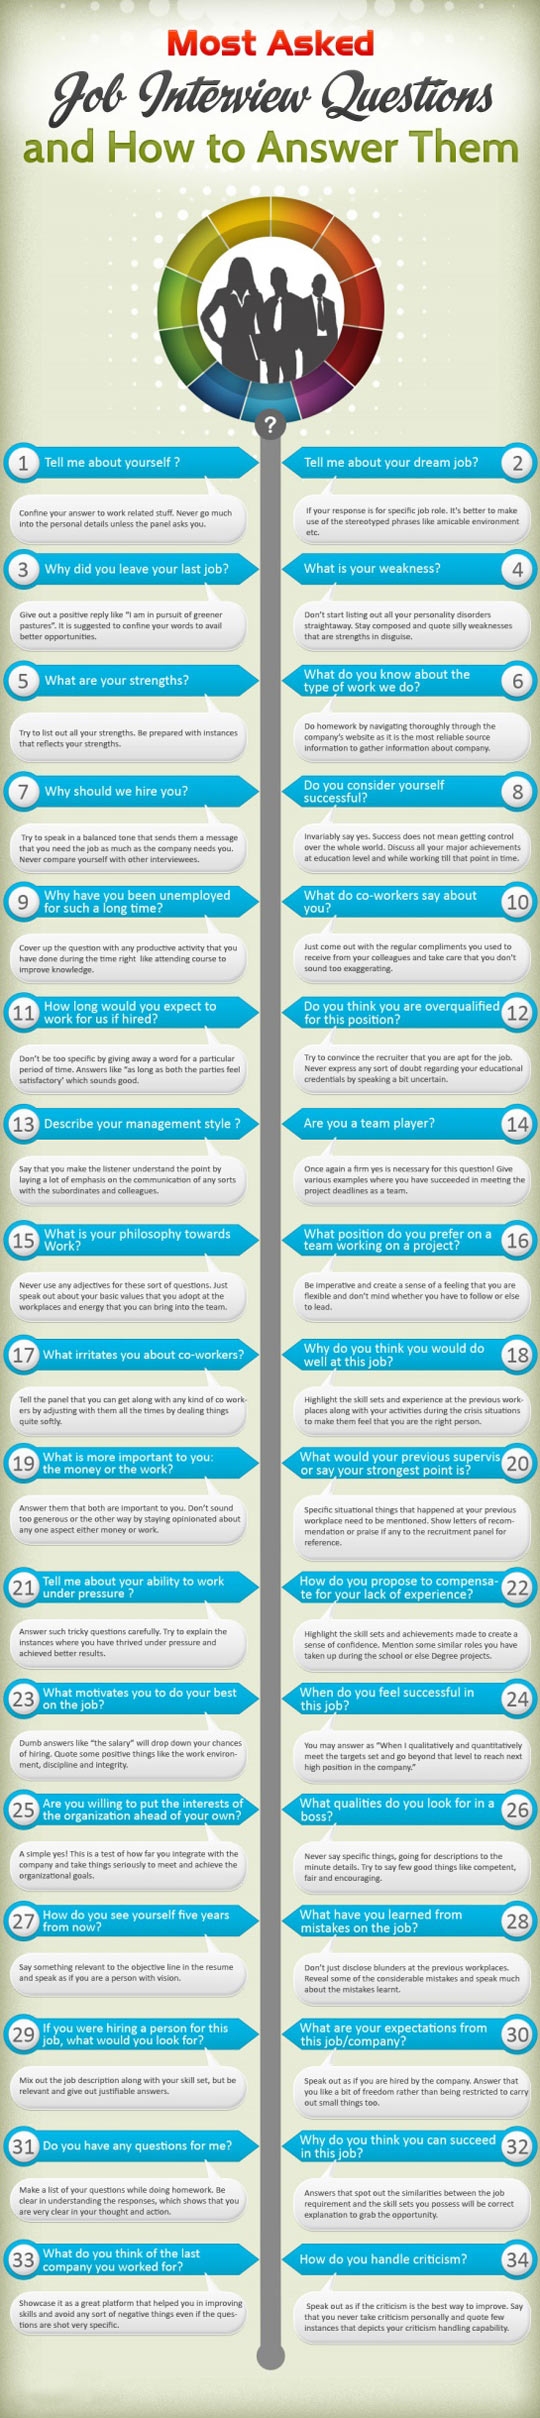 Most asked job interview questions.